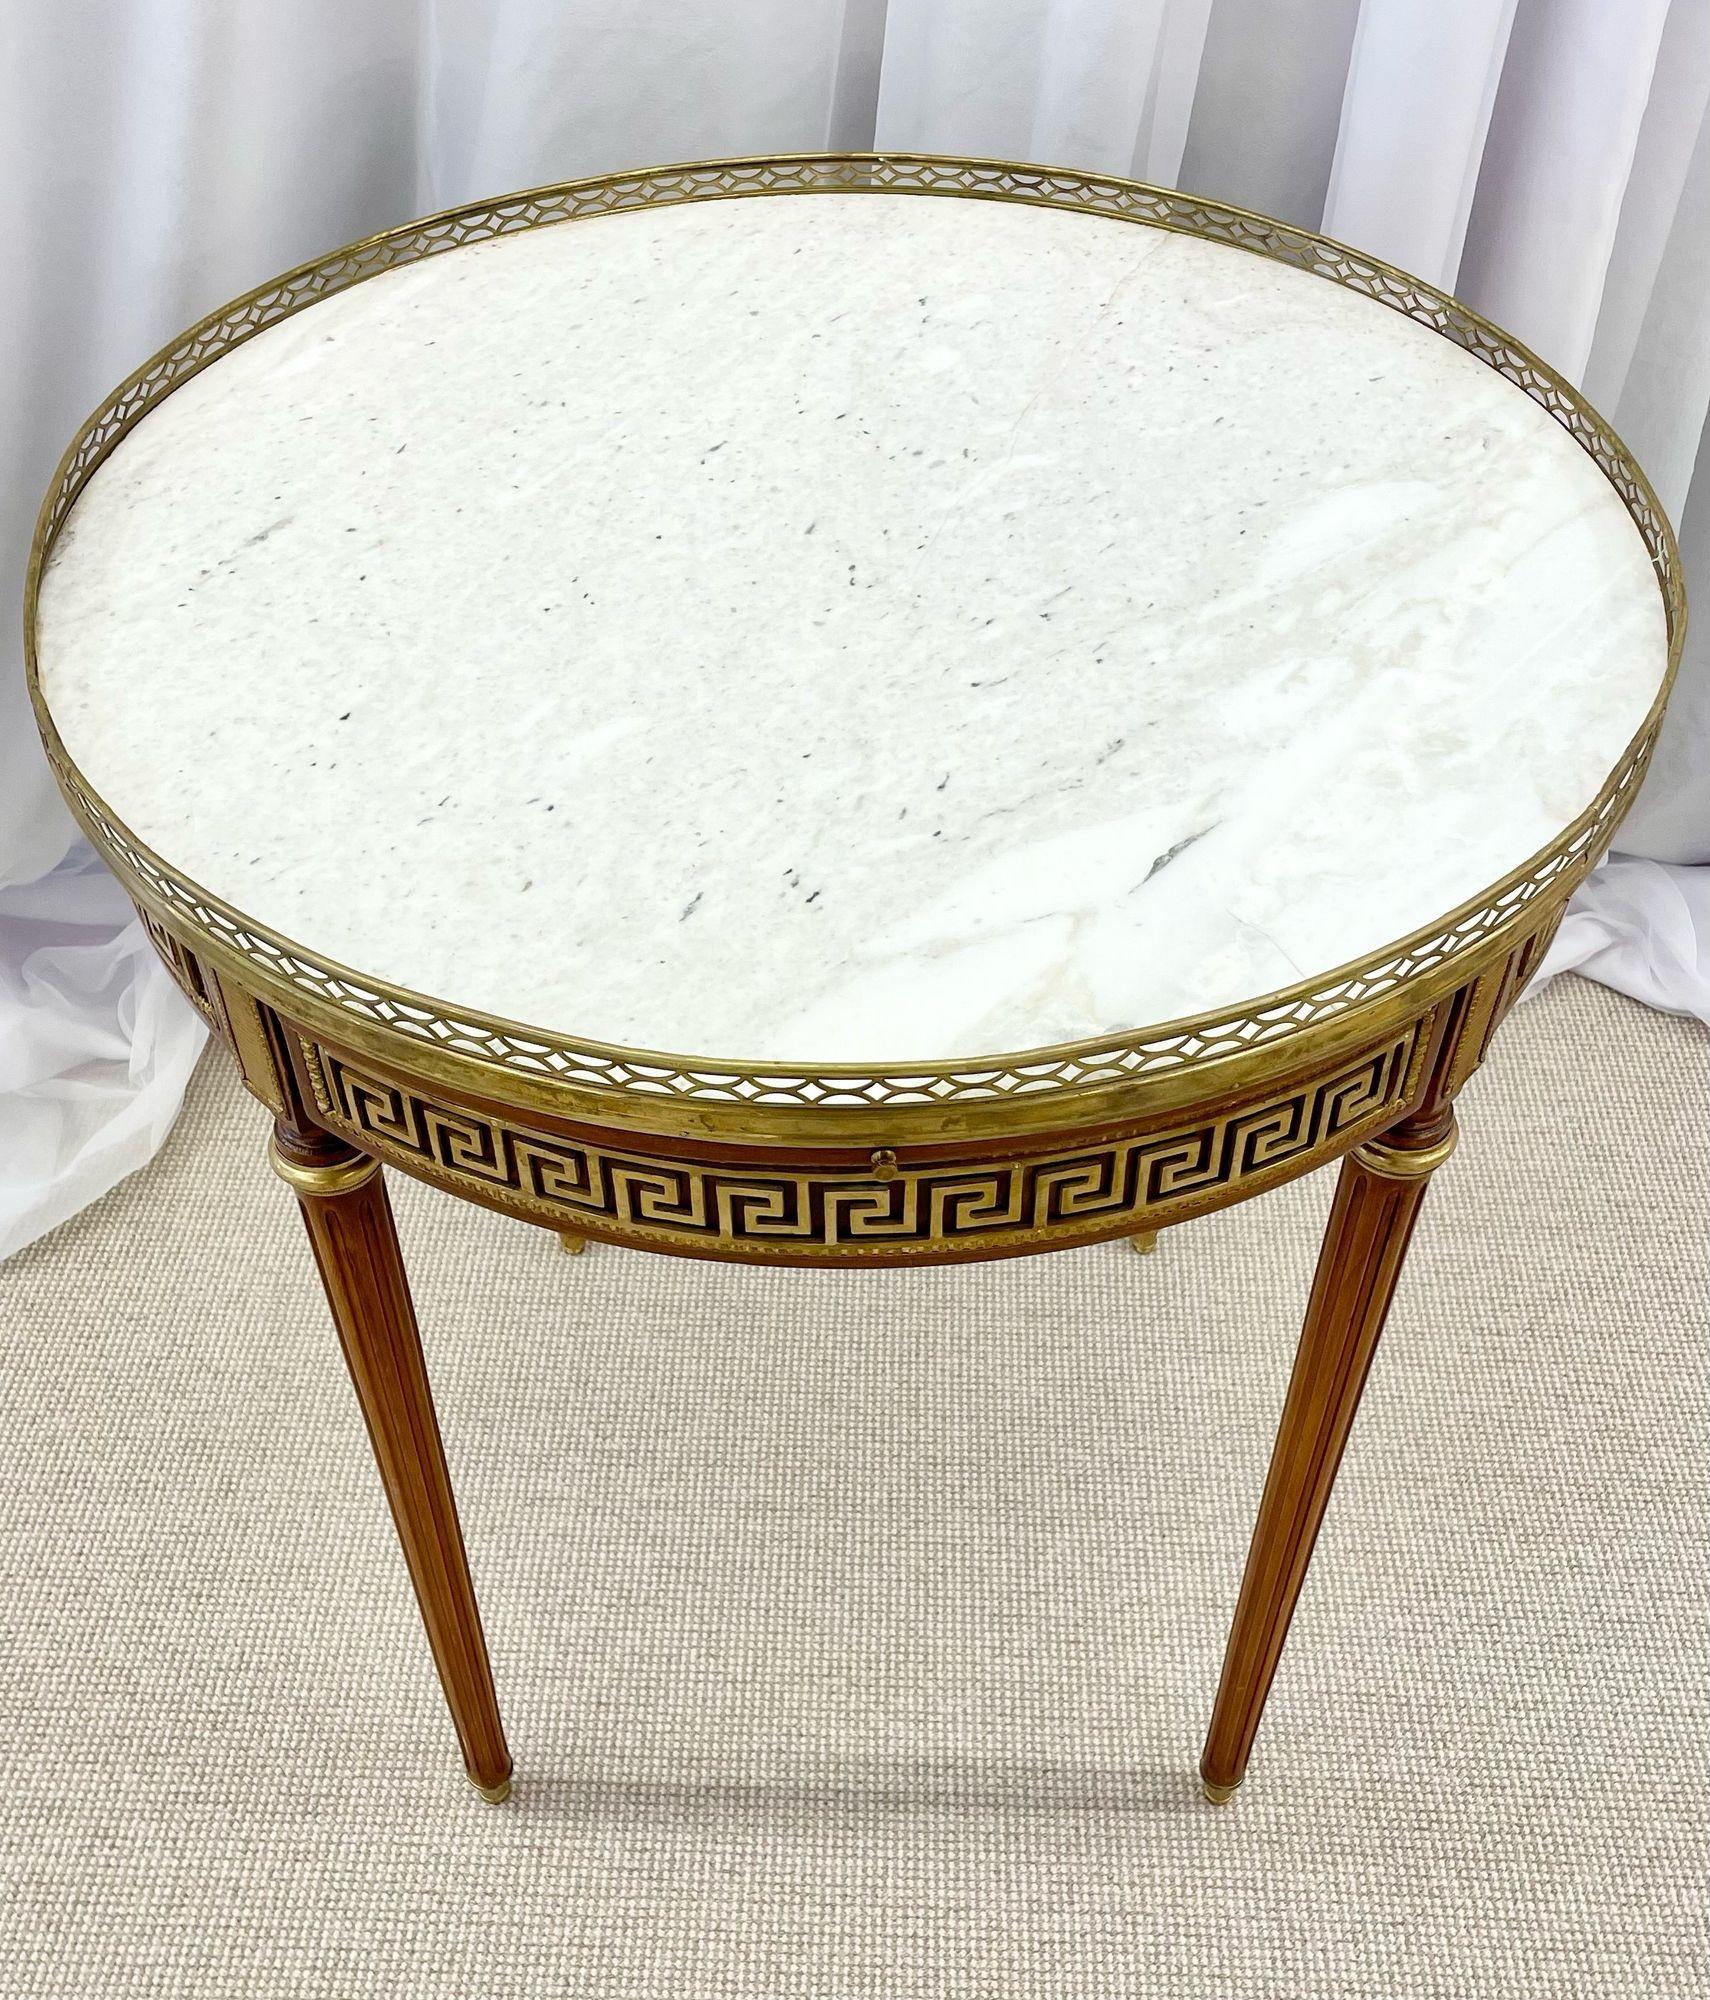 Mid-20th Century Single Marble Top Greek Key Bouillotte or End Table, Manner of Maison Jansen